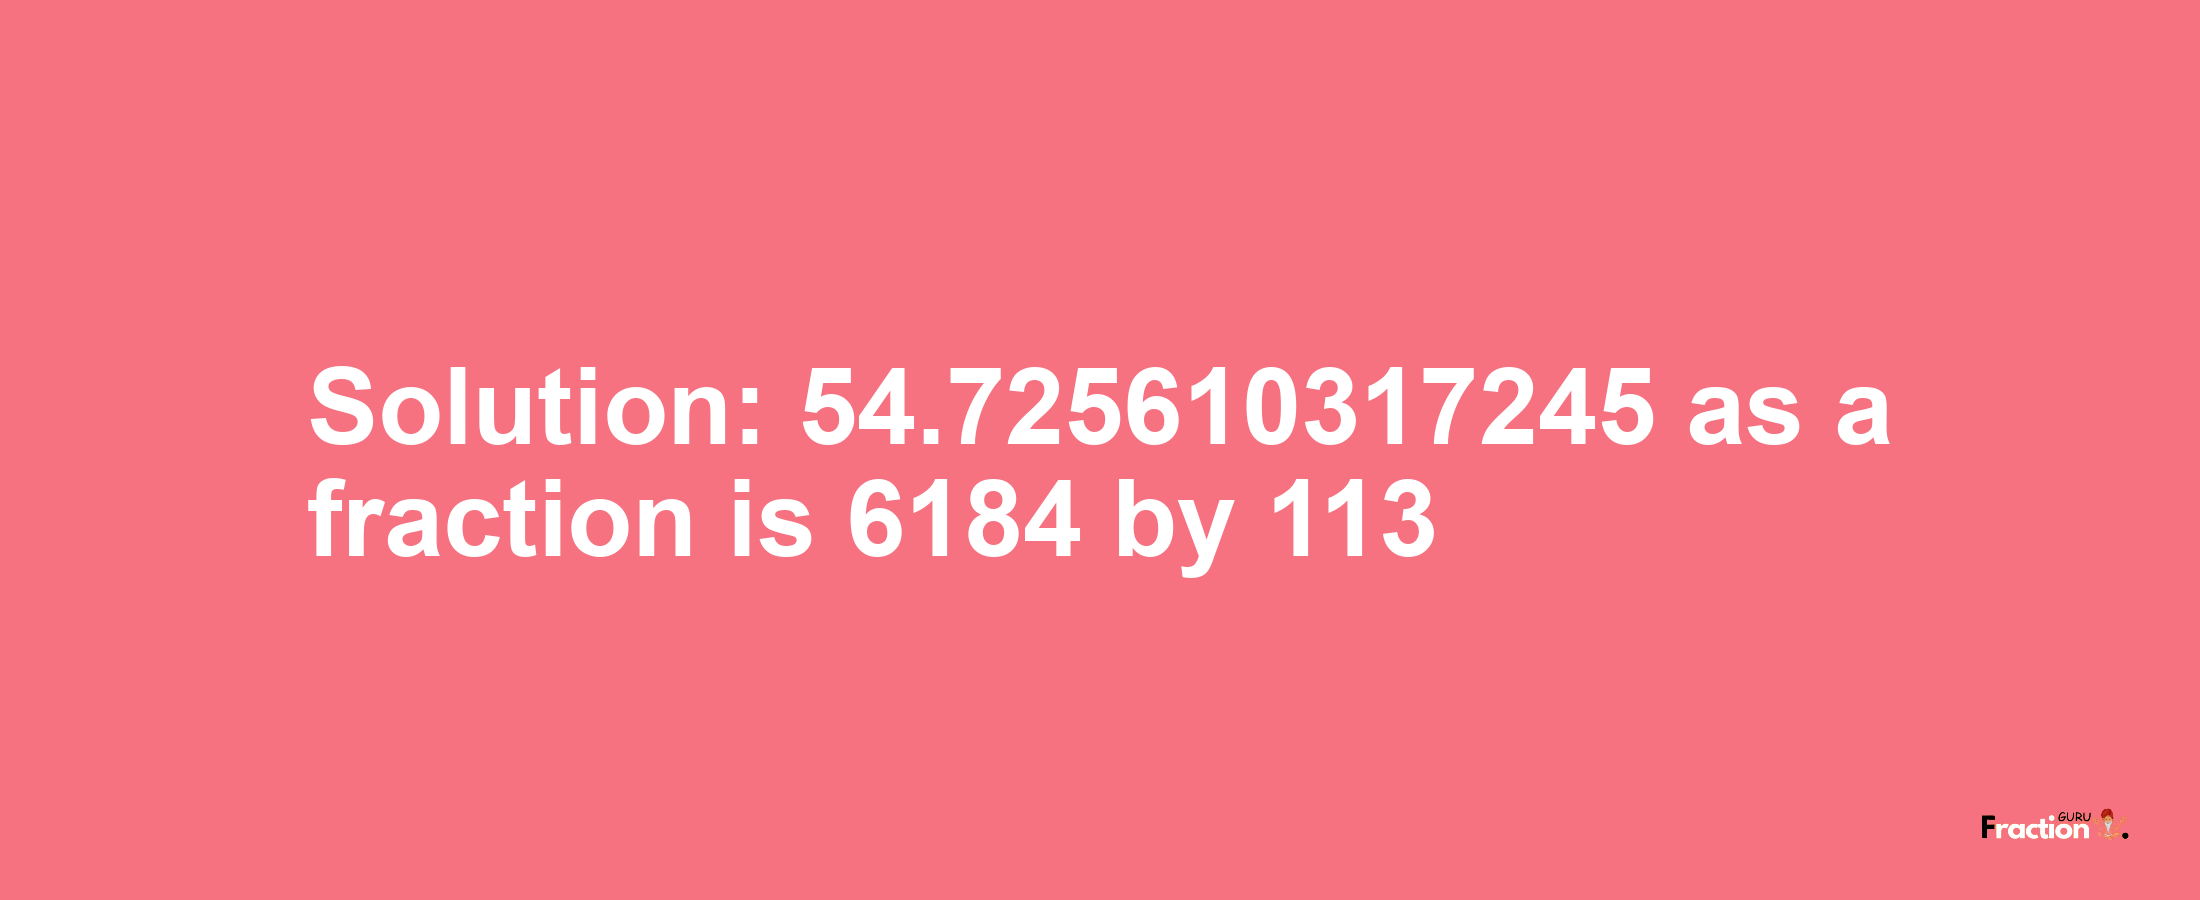 Solution:54.725610317245 as a fraction is 6184/113